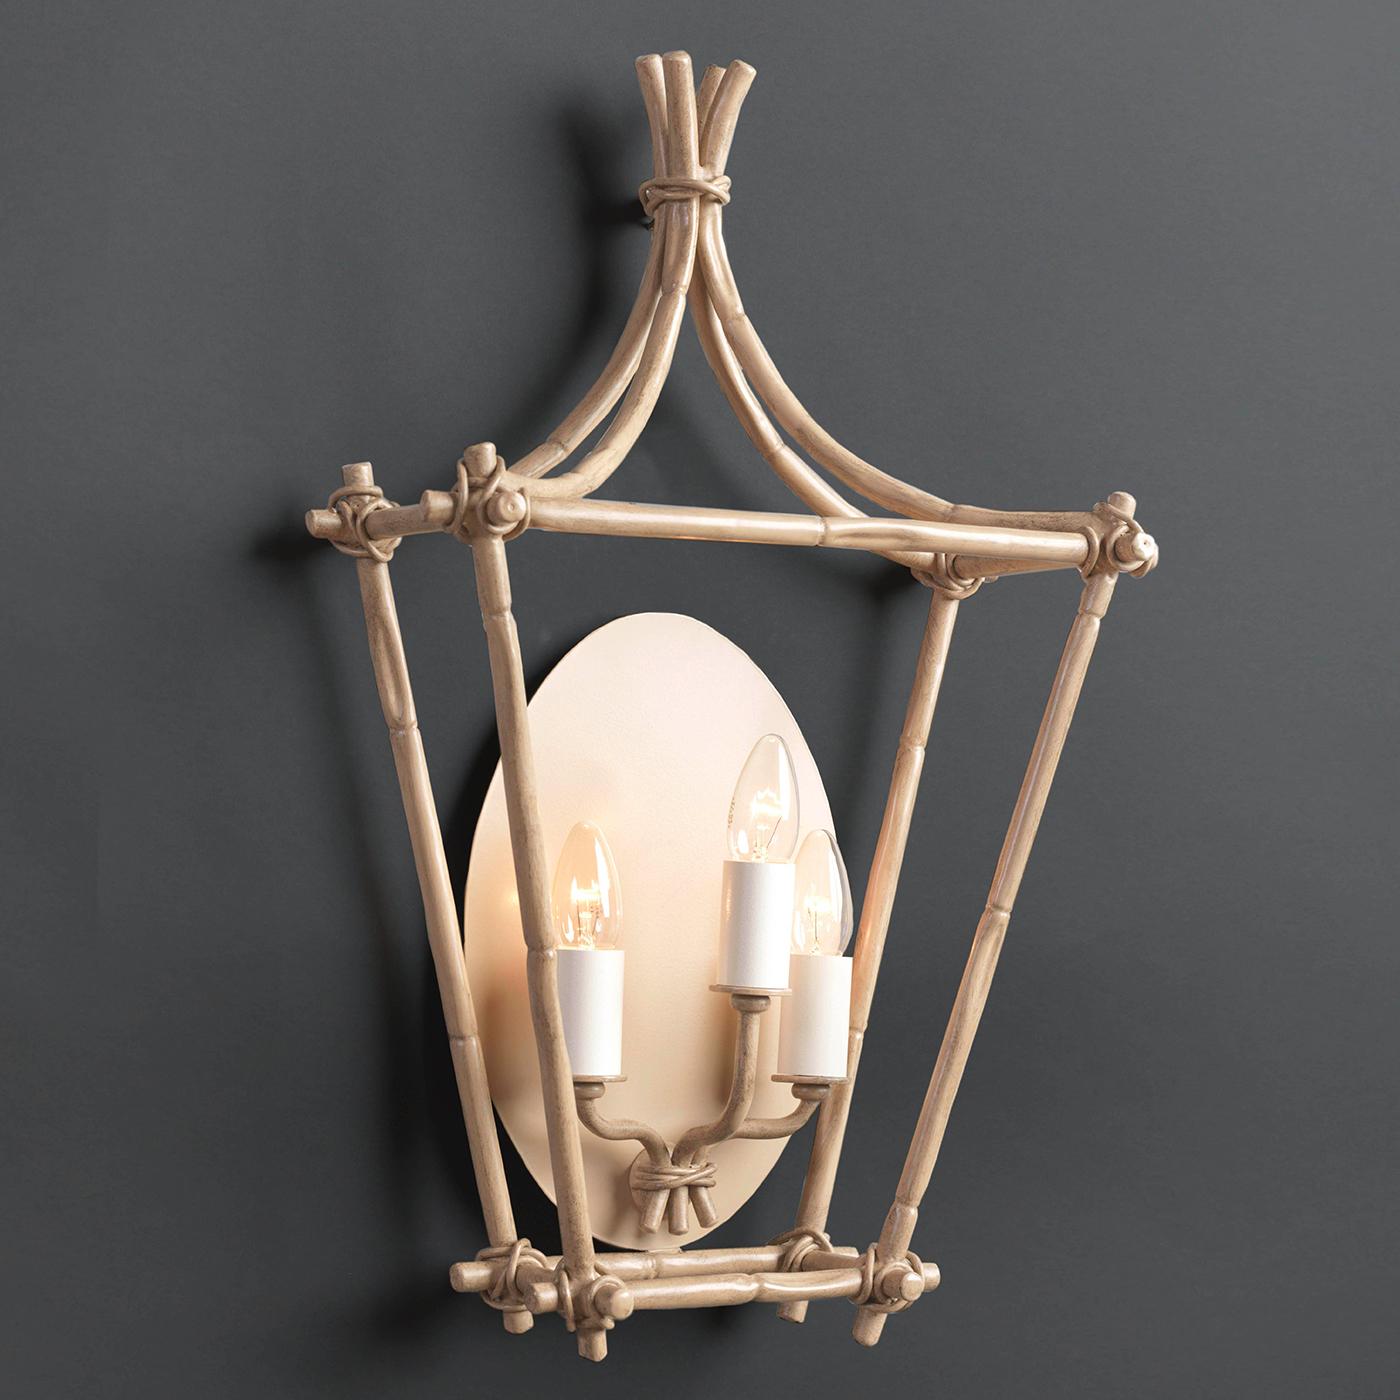 This stunning sconce is part of the Bamboo Collection. The skillful hands of Officina Ciani's craftsmen forge the stainless steel structure to reveal the fine elements with the texture and shape of bamboo sticks. An ideal accent to a rustic-chic or